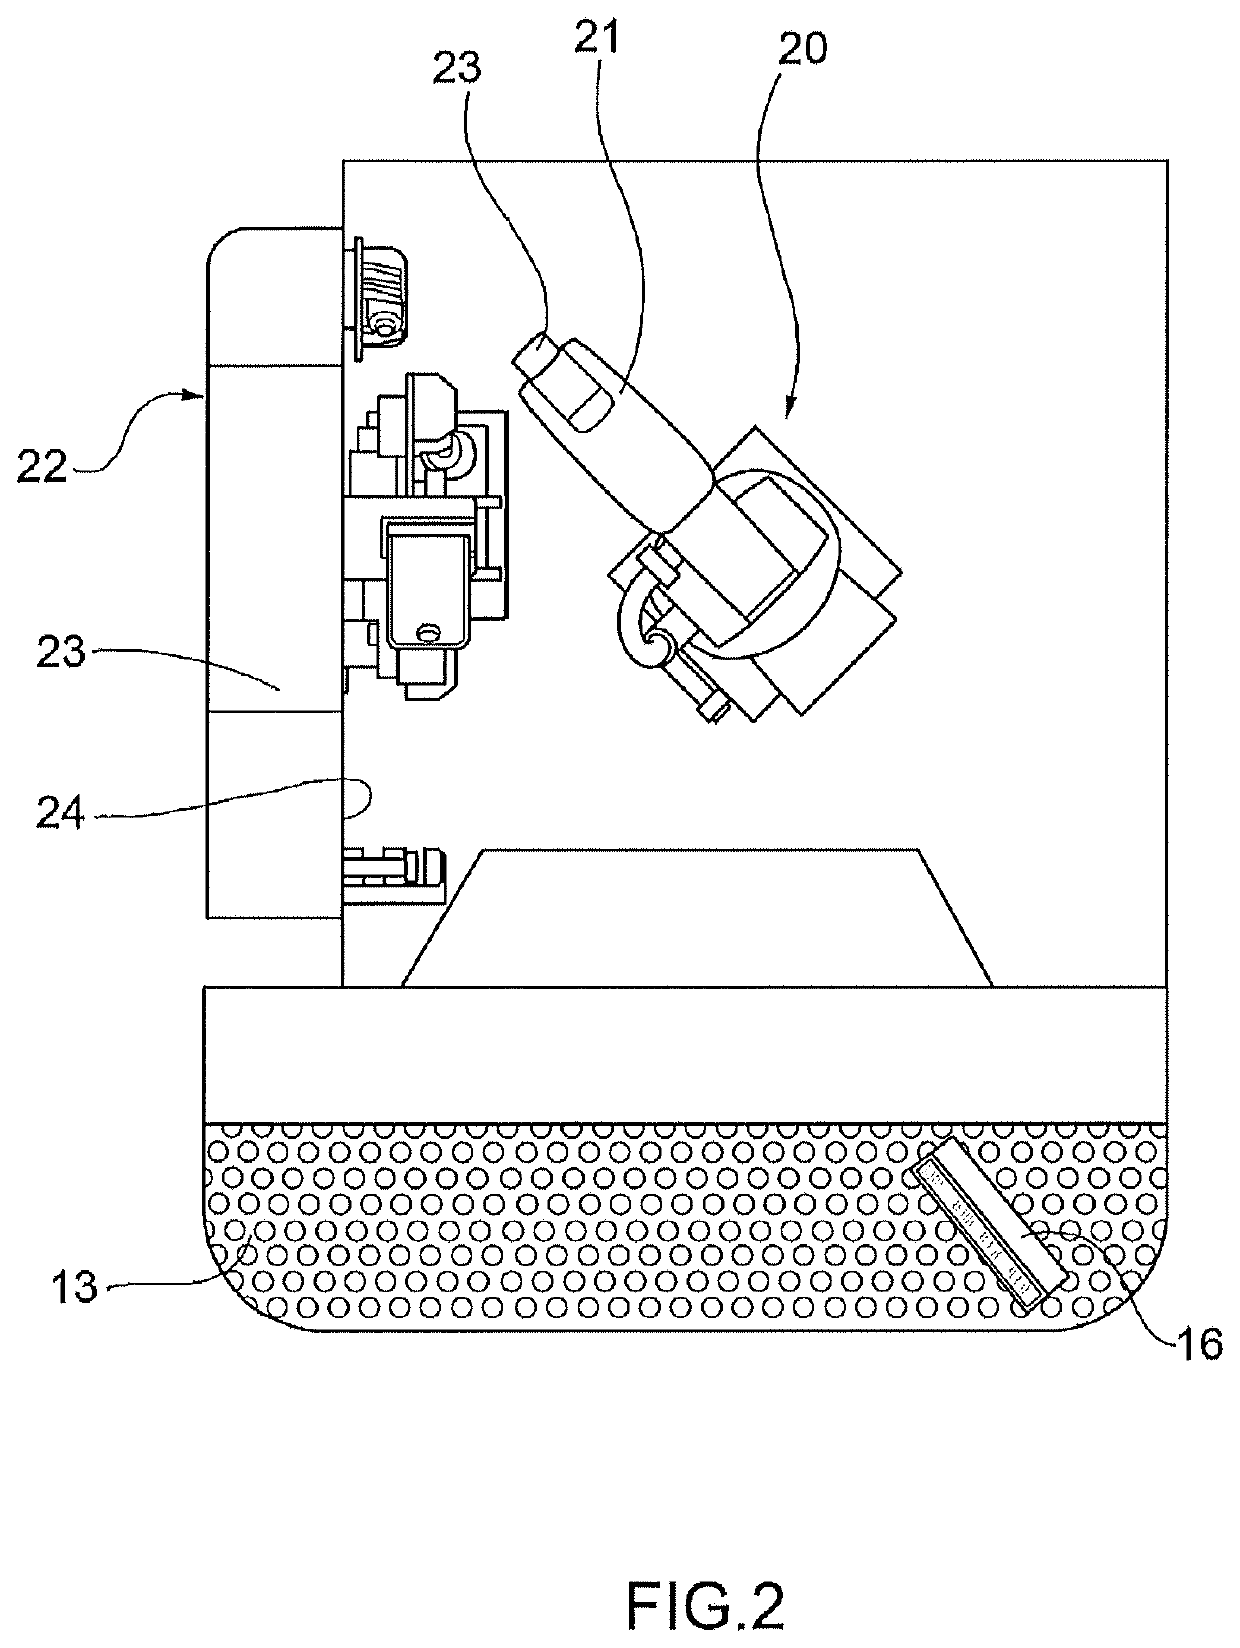 Machine and process for preparing intravenous medicaments